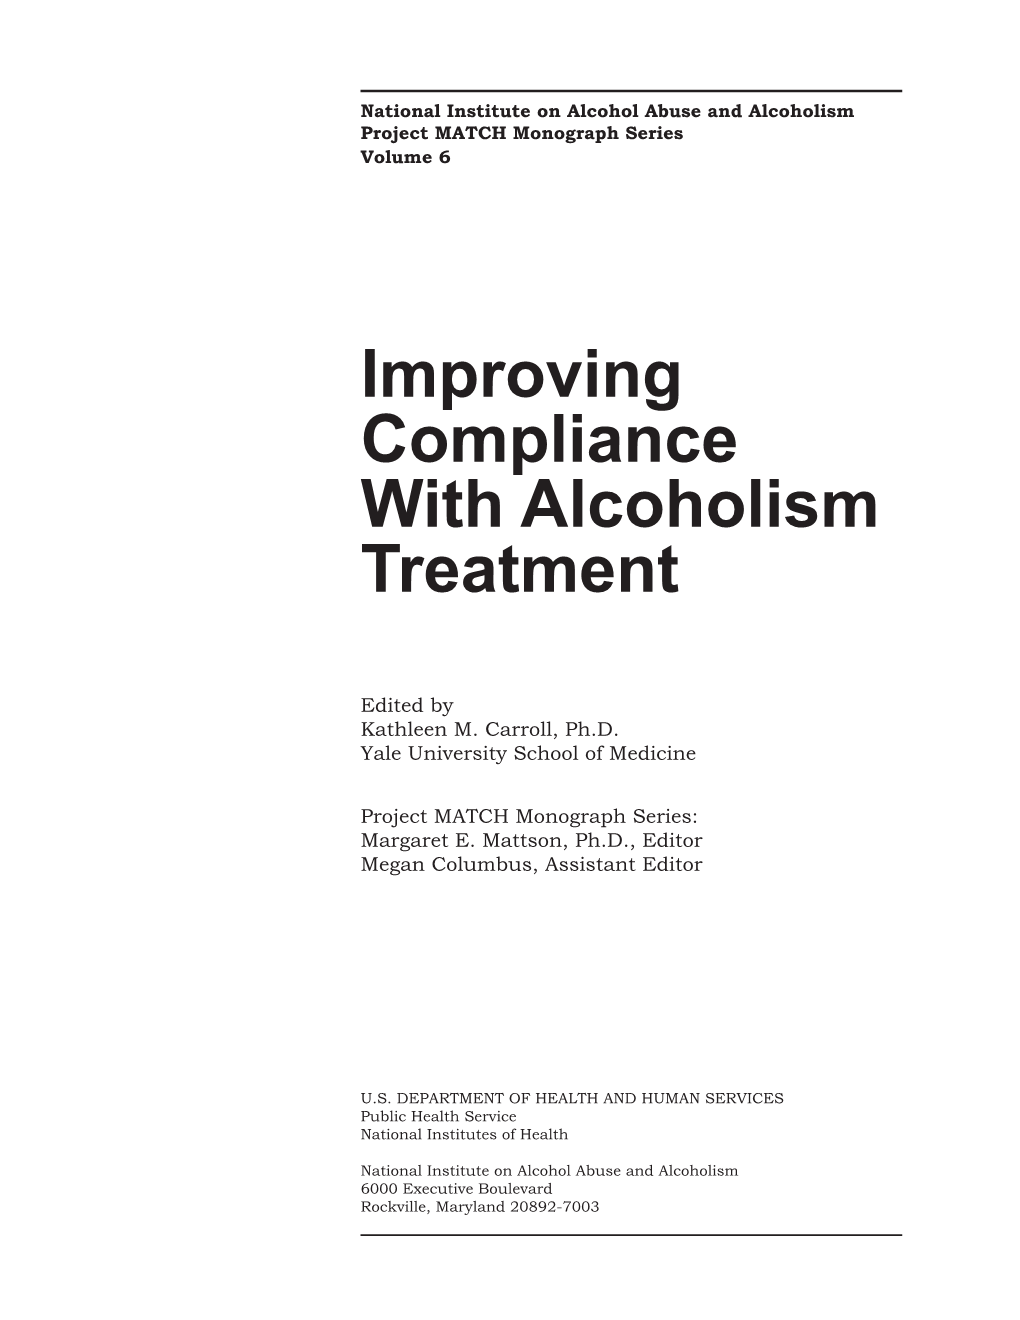 Project MATCH Volume 6: Improving Compliance with Alcoholism Treatment